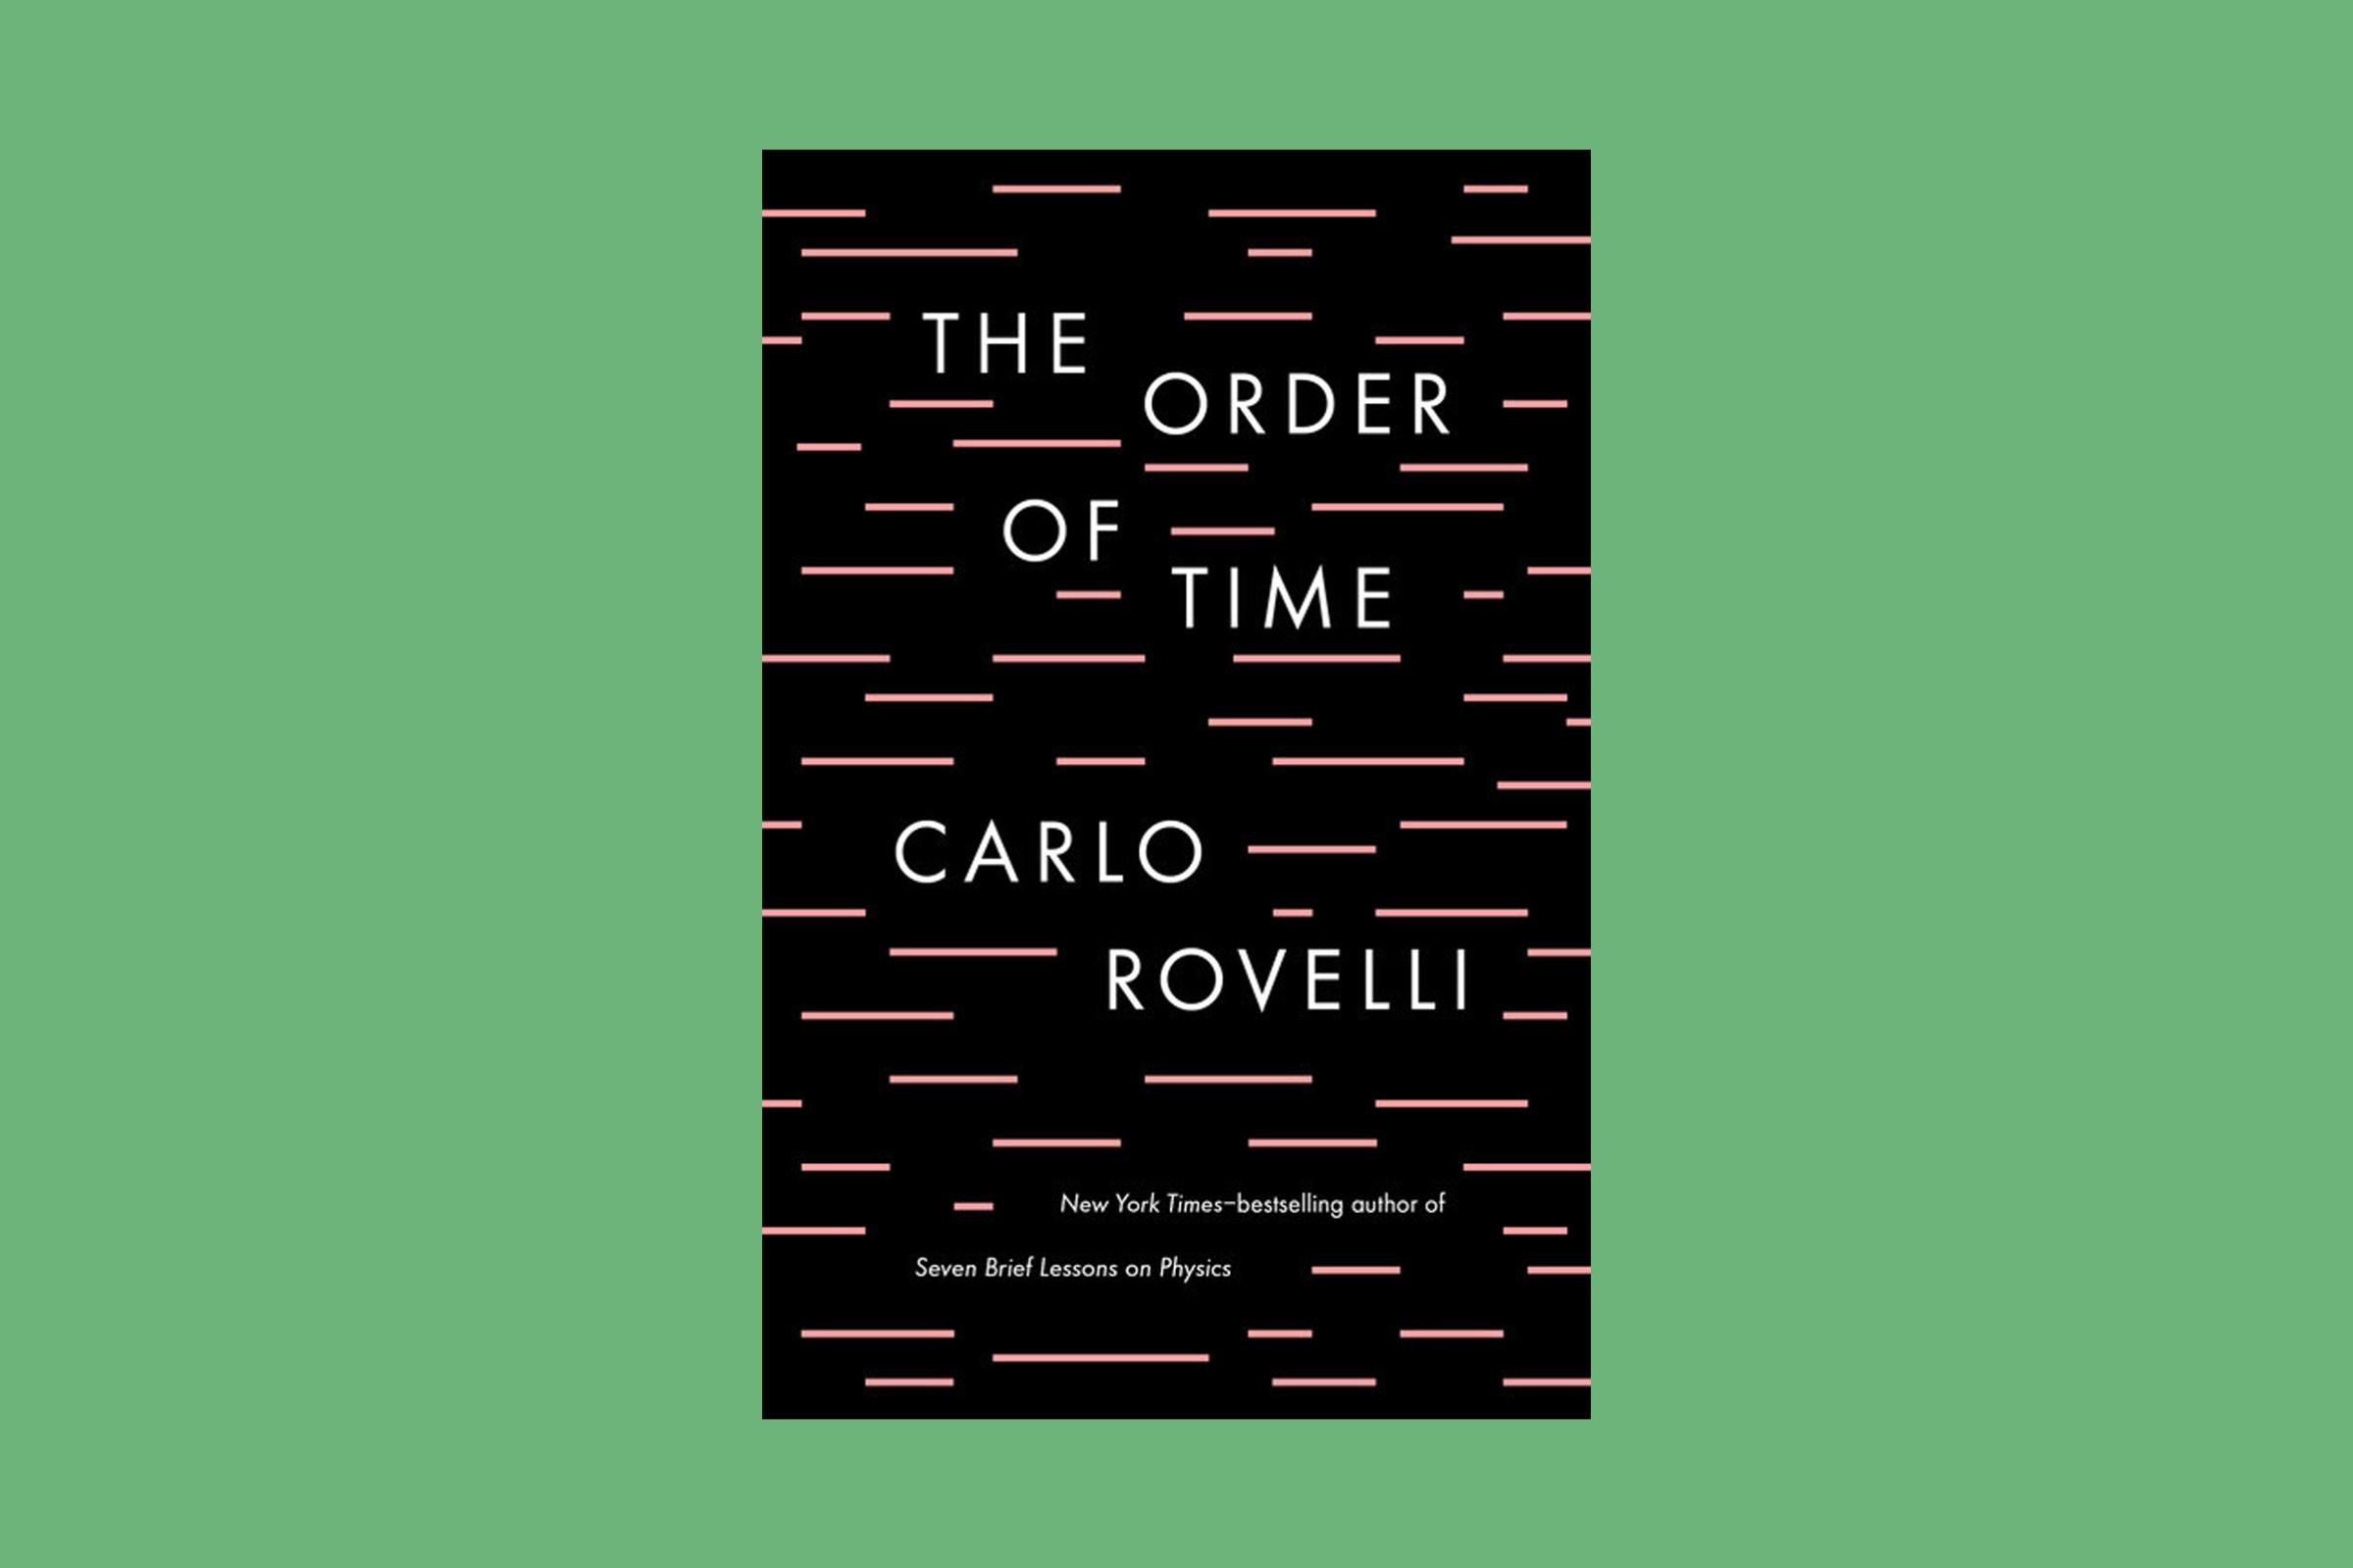 The Order of Time, Carlo Rovelli, Riverhead